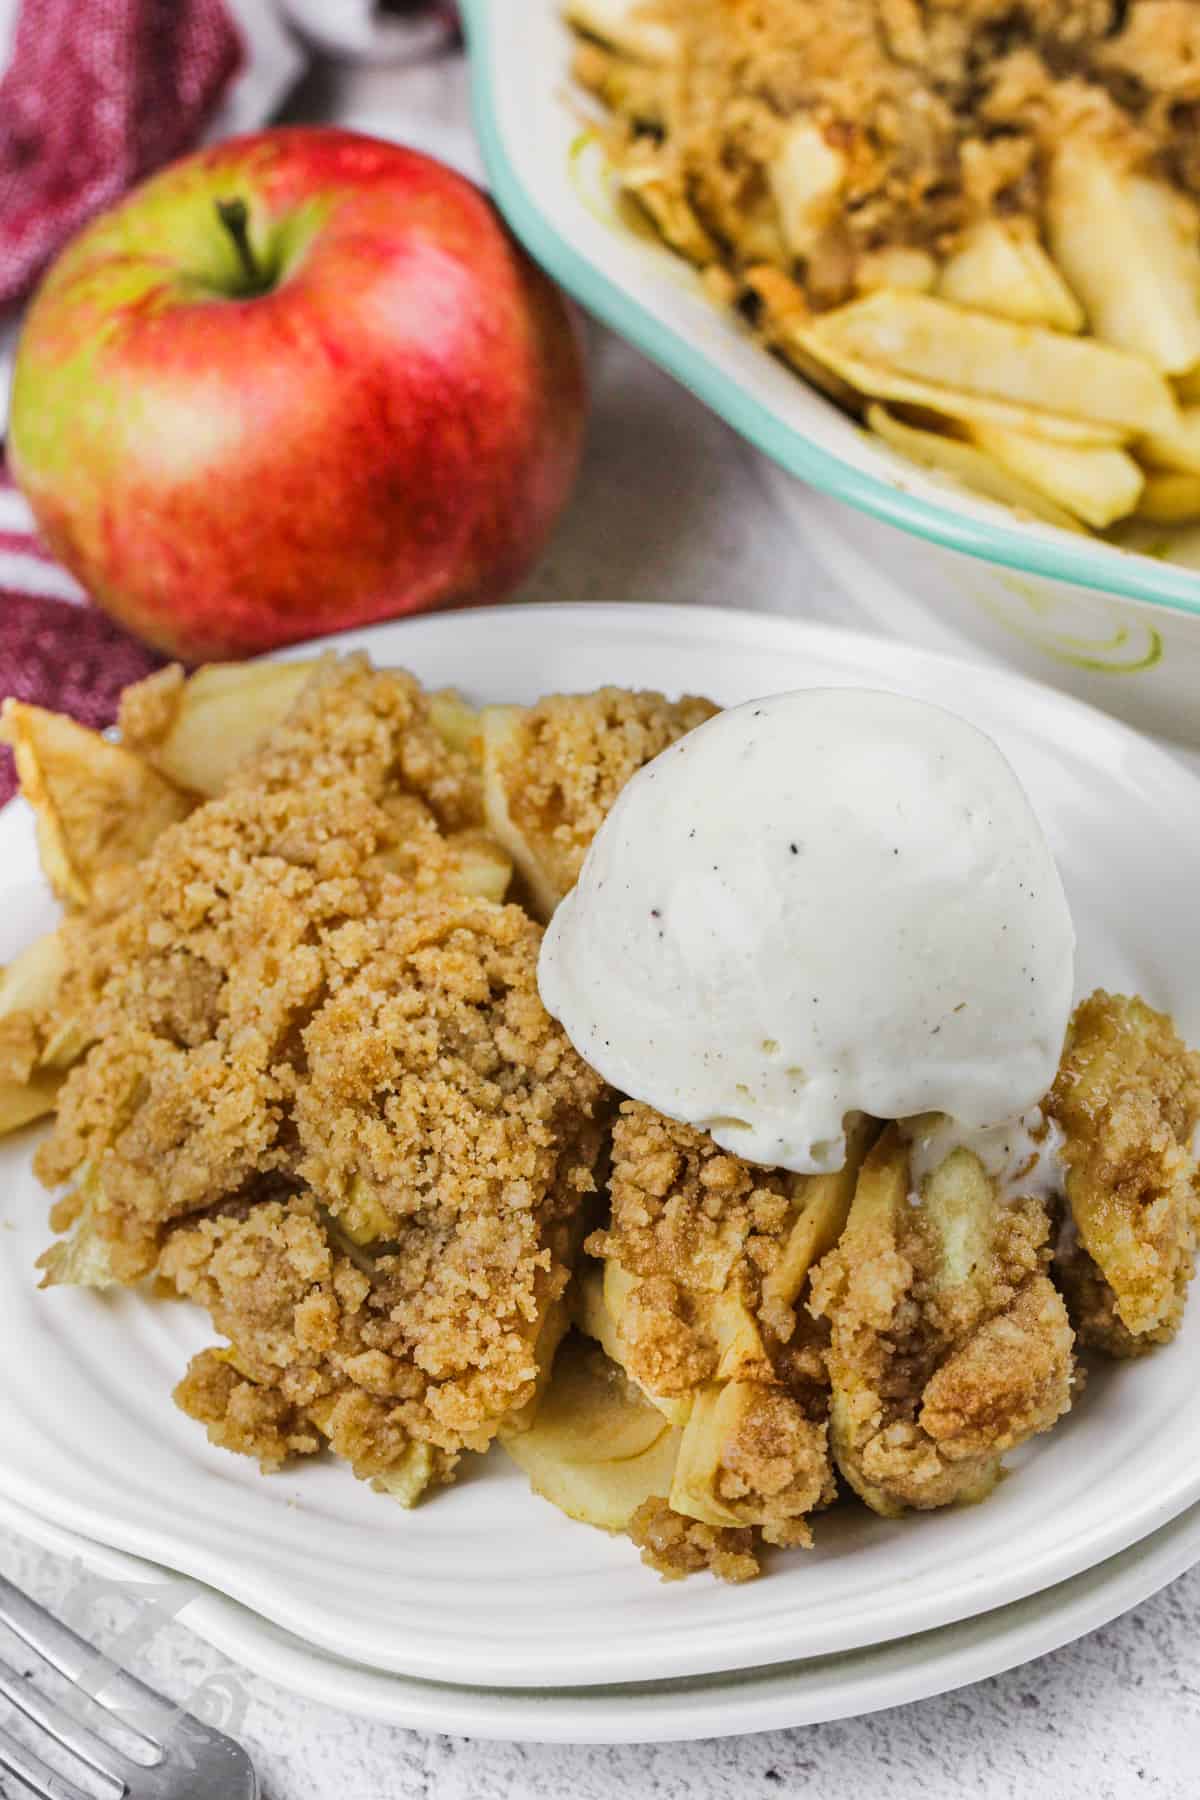 Apple Crumble with a scoop of ice cream on a plate